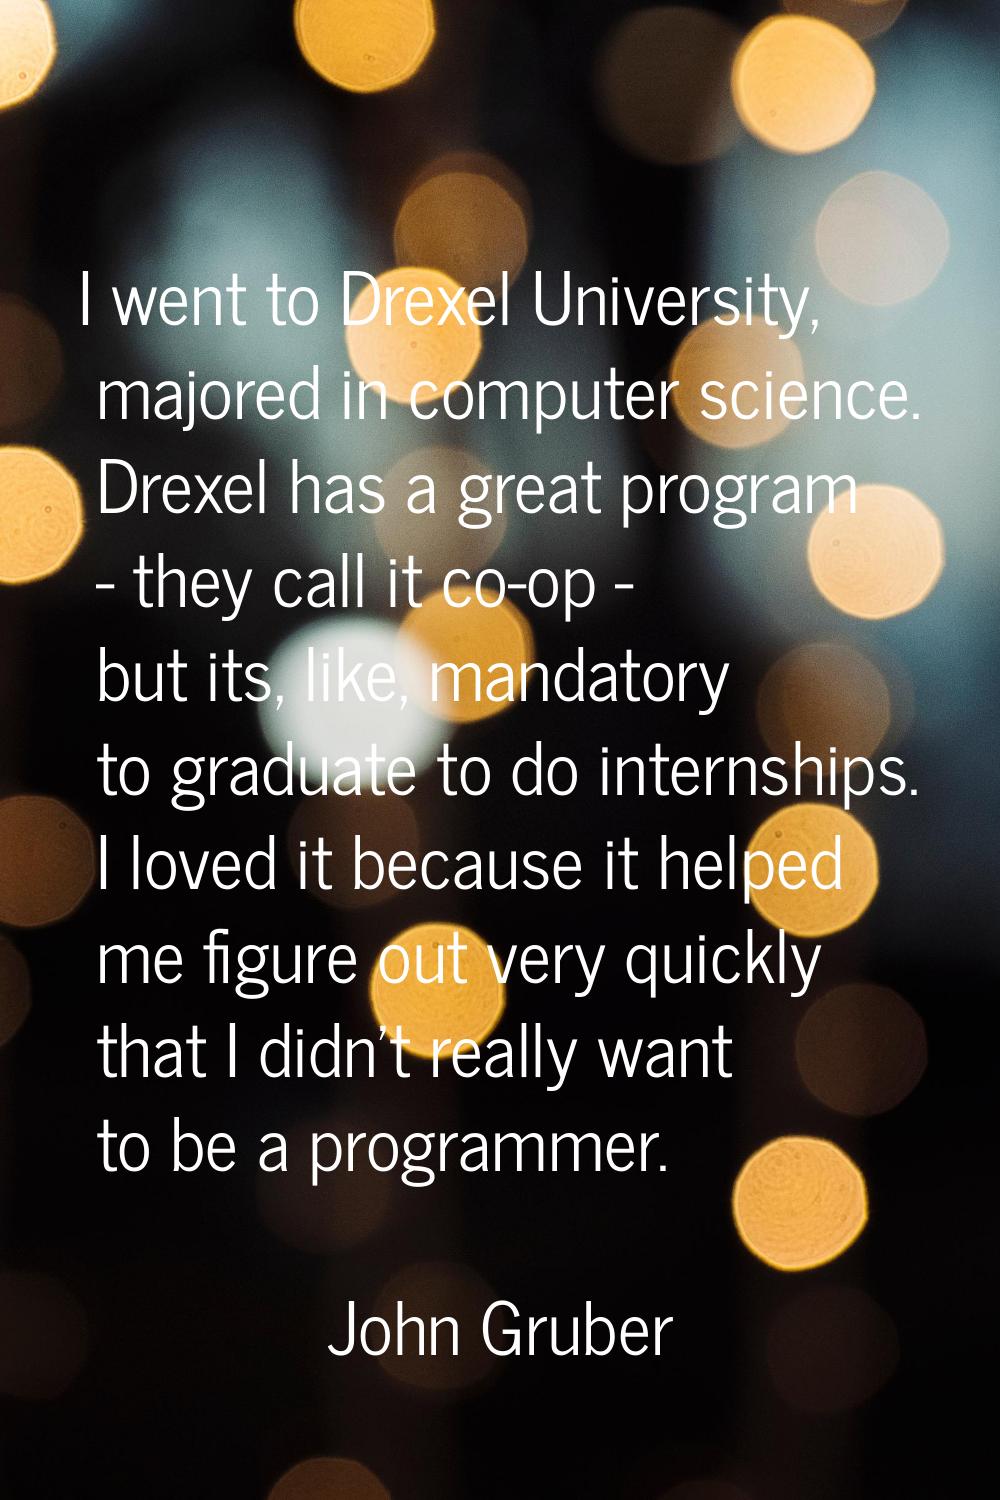 I went to Drexel University, majored in computer science. Drexel has a great program - they call it